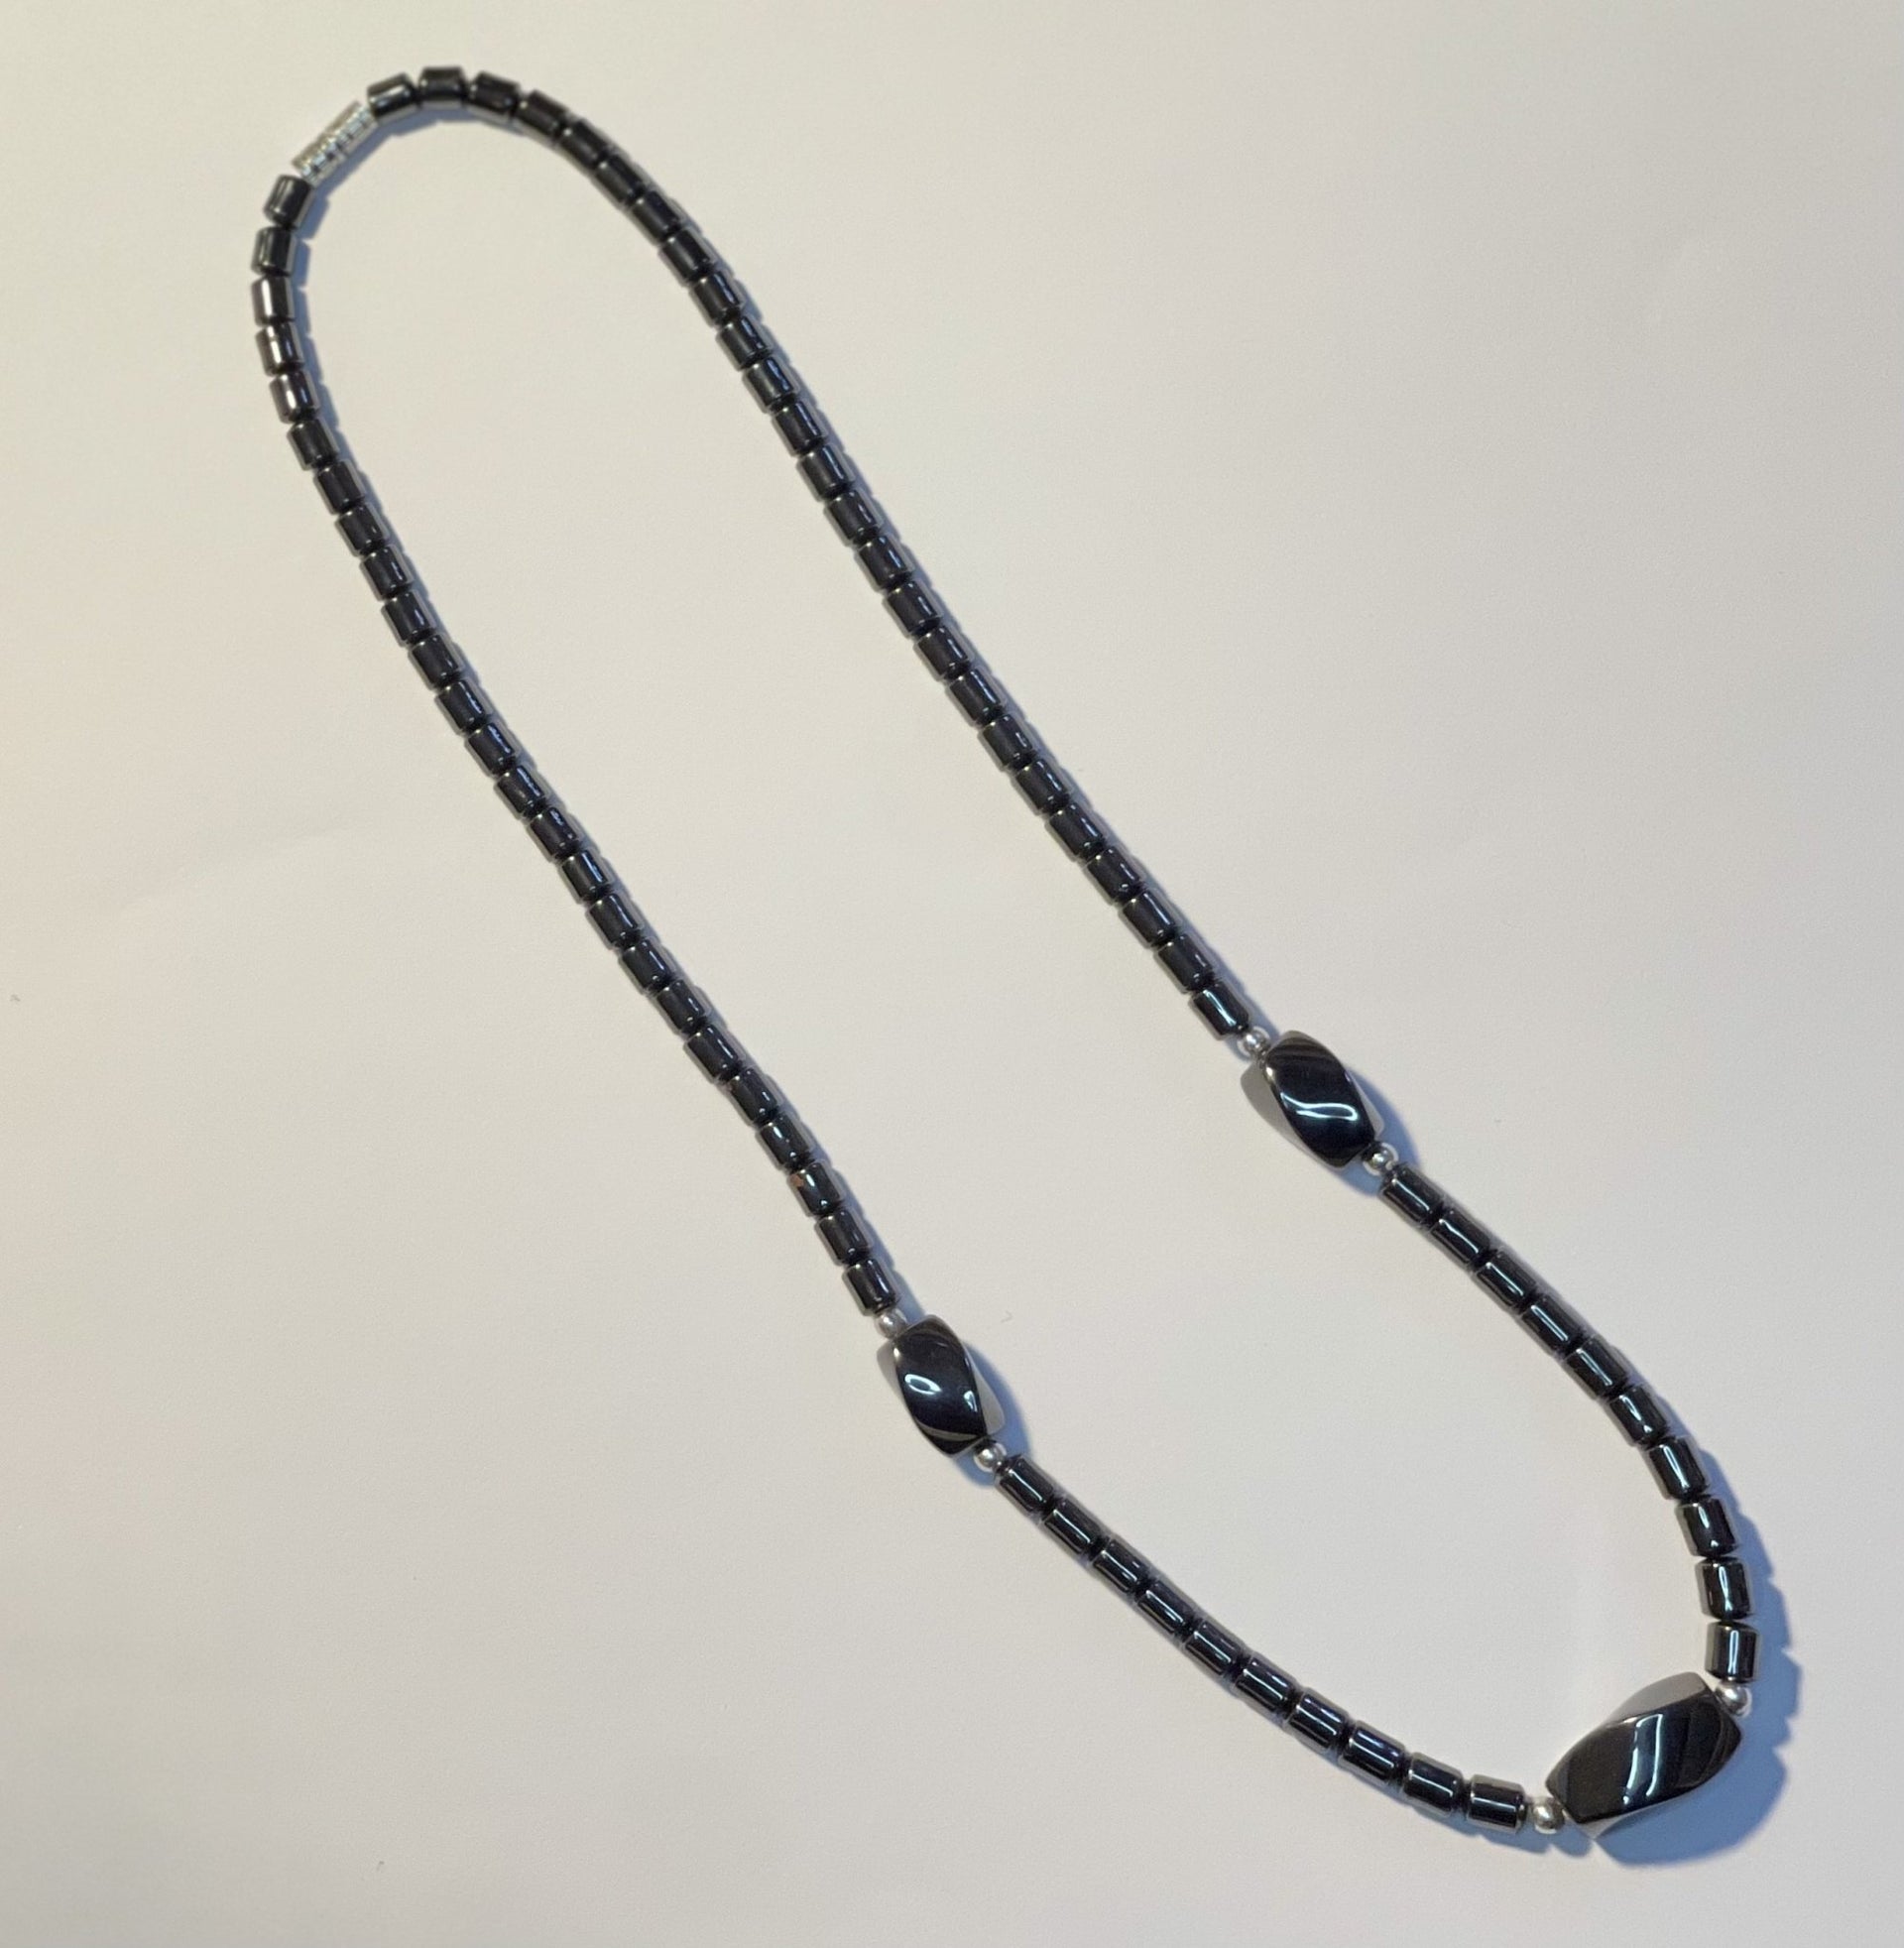 BLACK AND GOLD HEMATITE NECKLACE – YOUROCK JEWELS